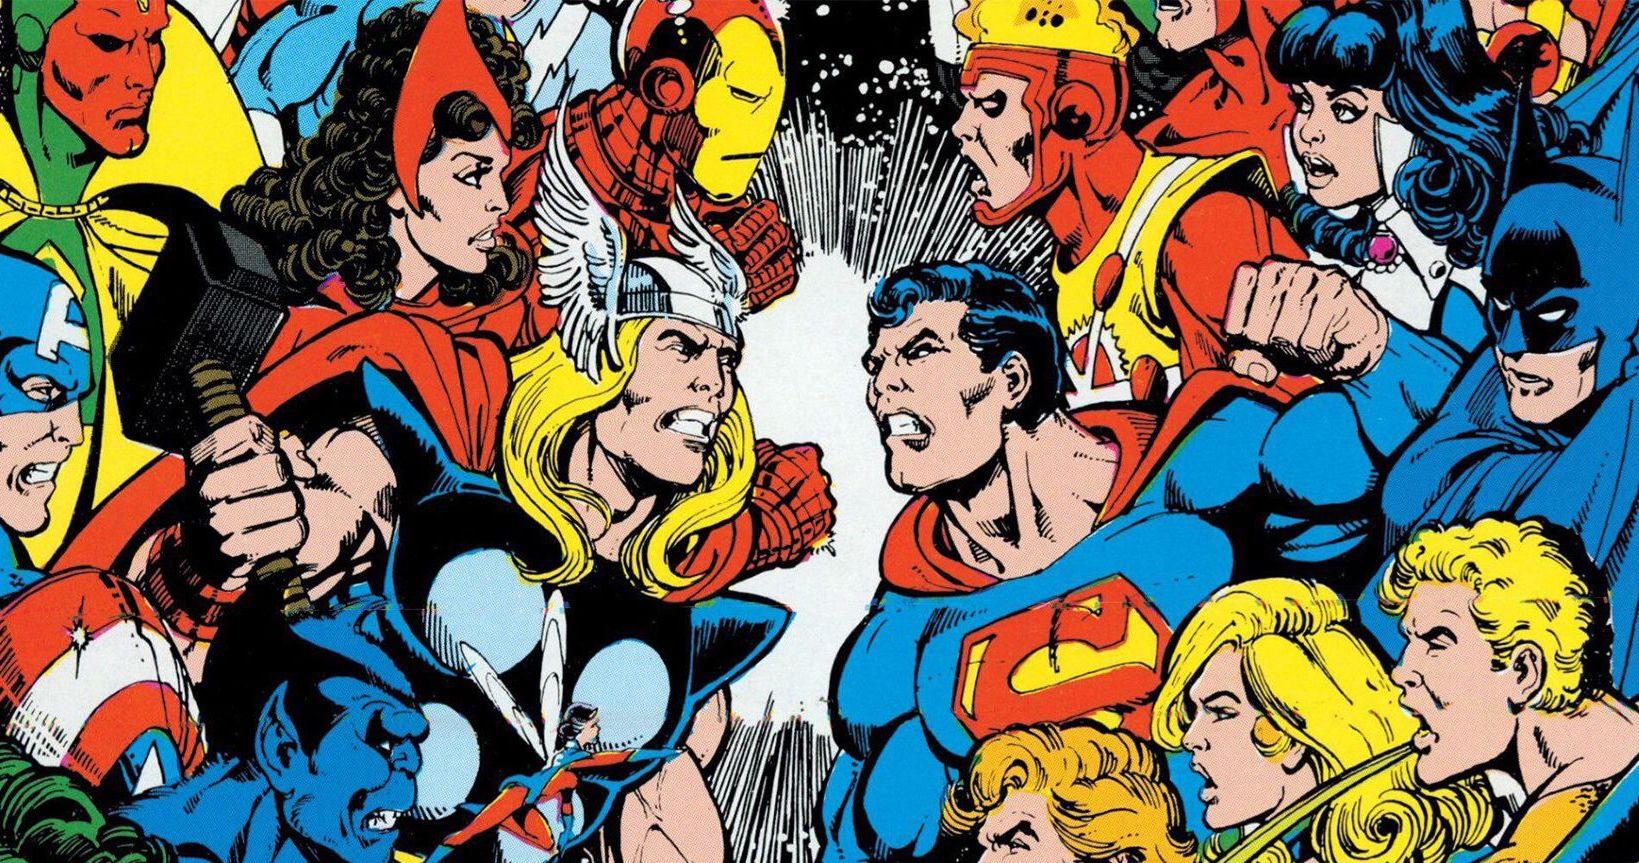 James Gunn Has an Epic Marvel and DC Dream Team Crossover Project Idea